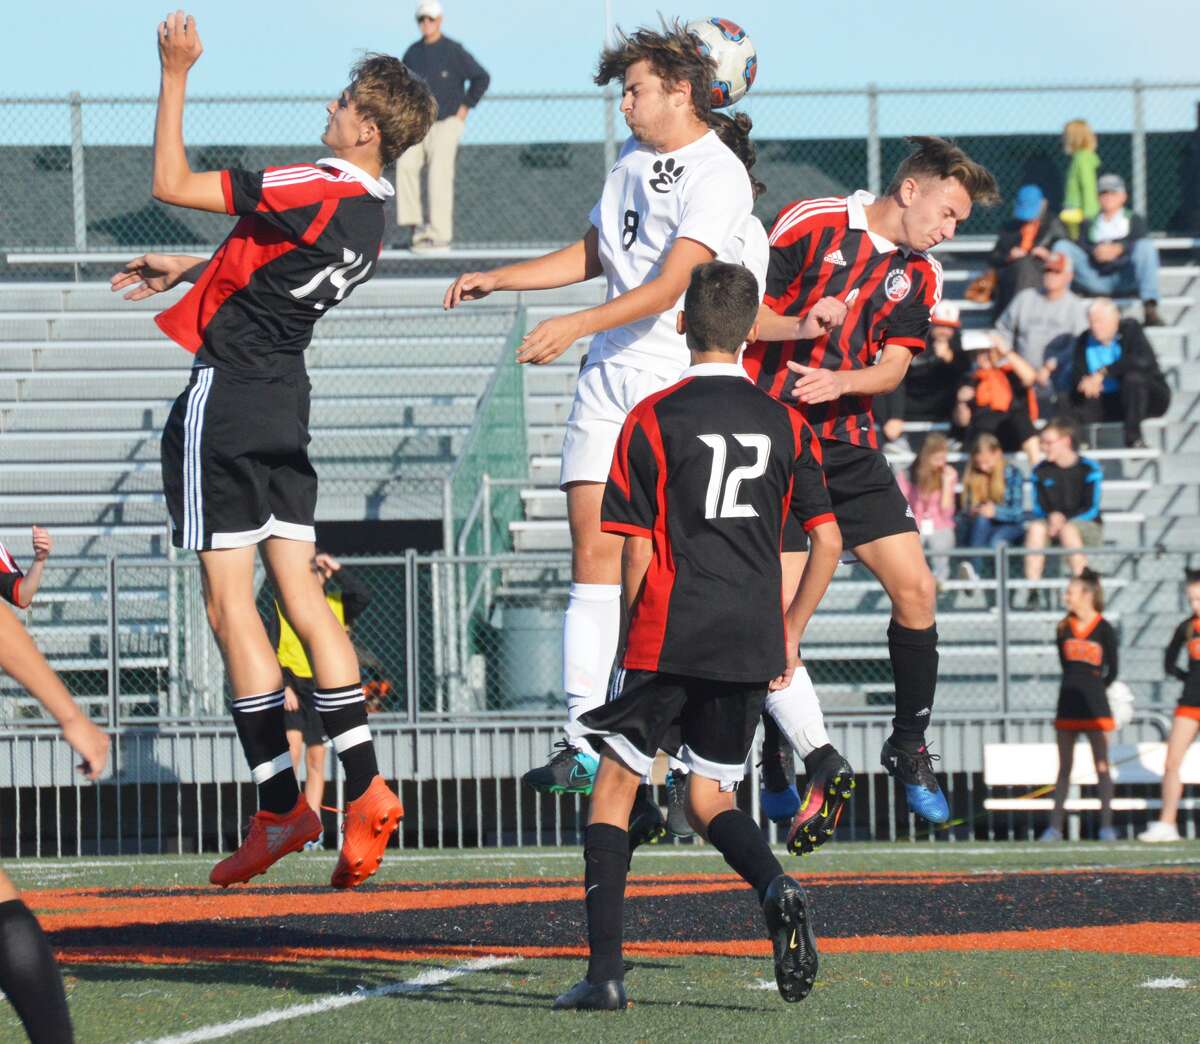 Edwardsville midfielder Devin Parker, center, wins a 50-50 ball with a header against three Granite City defenders during first-half action of the Class 3A Edwardsville Regional semifinals inside the District 7 Sports Complex on Tuesday.